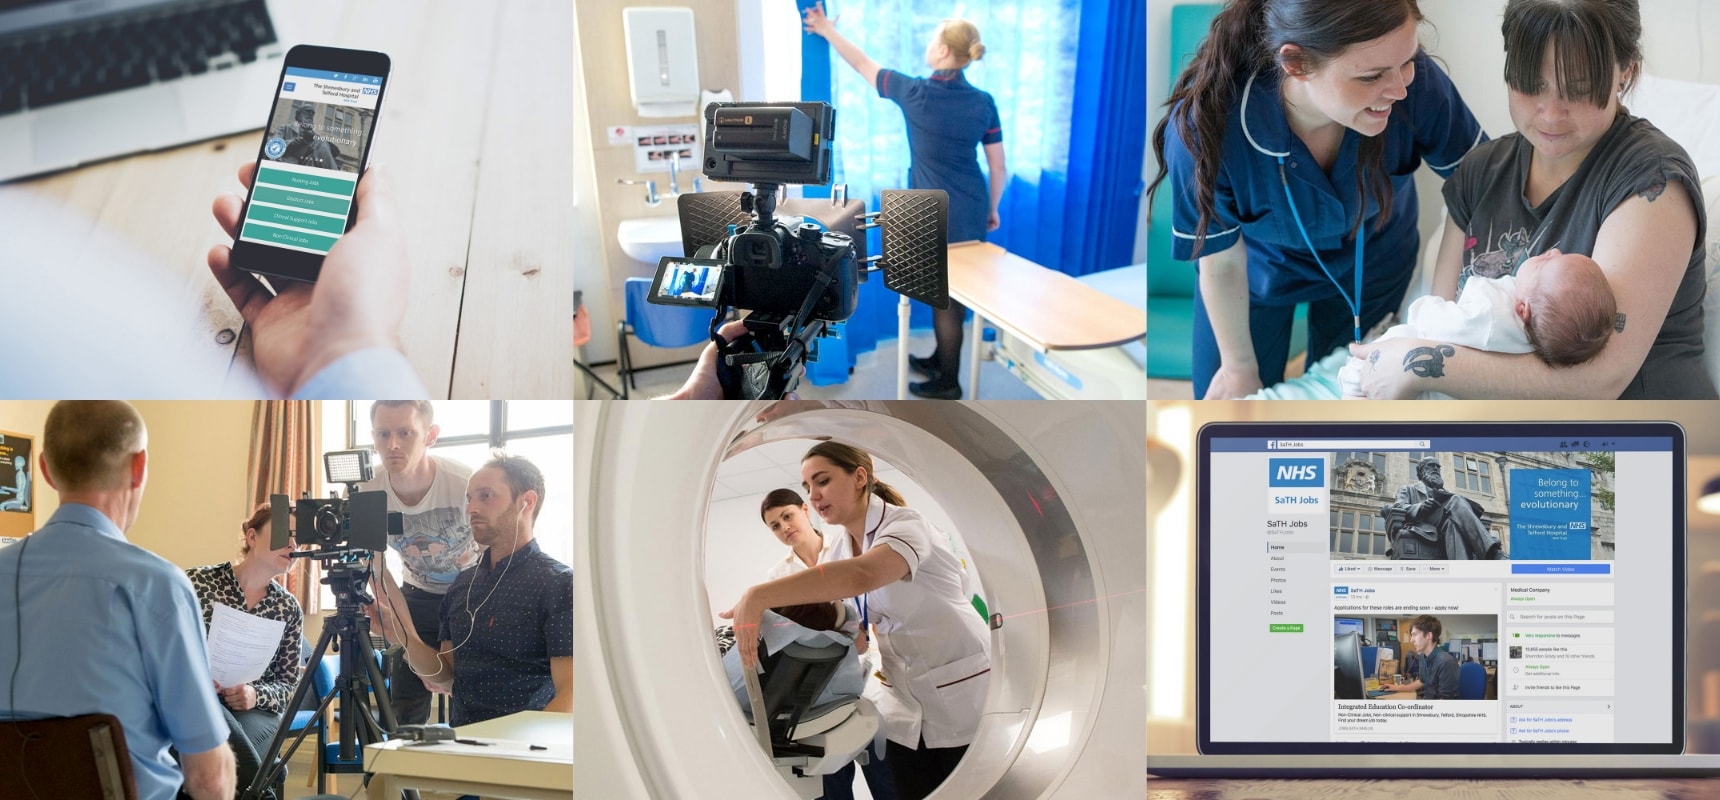 A montage of photos displaying NHS marketing initiatives by Clear